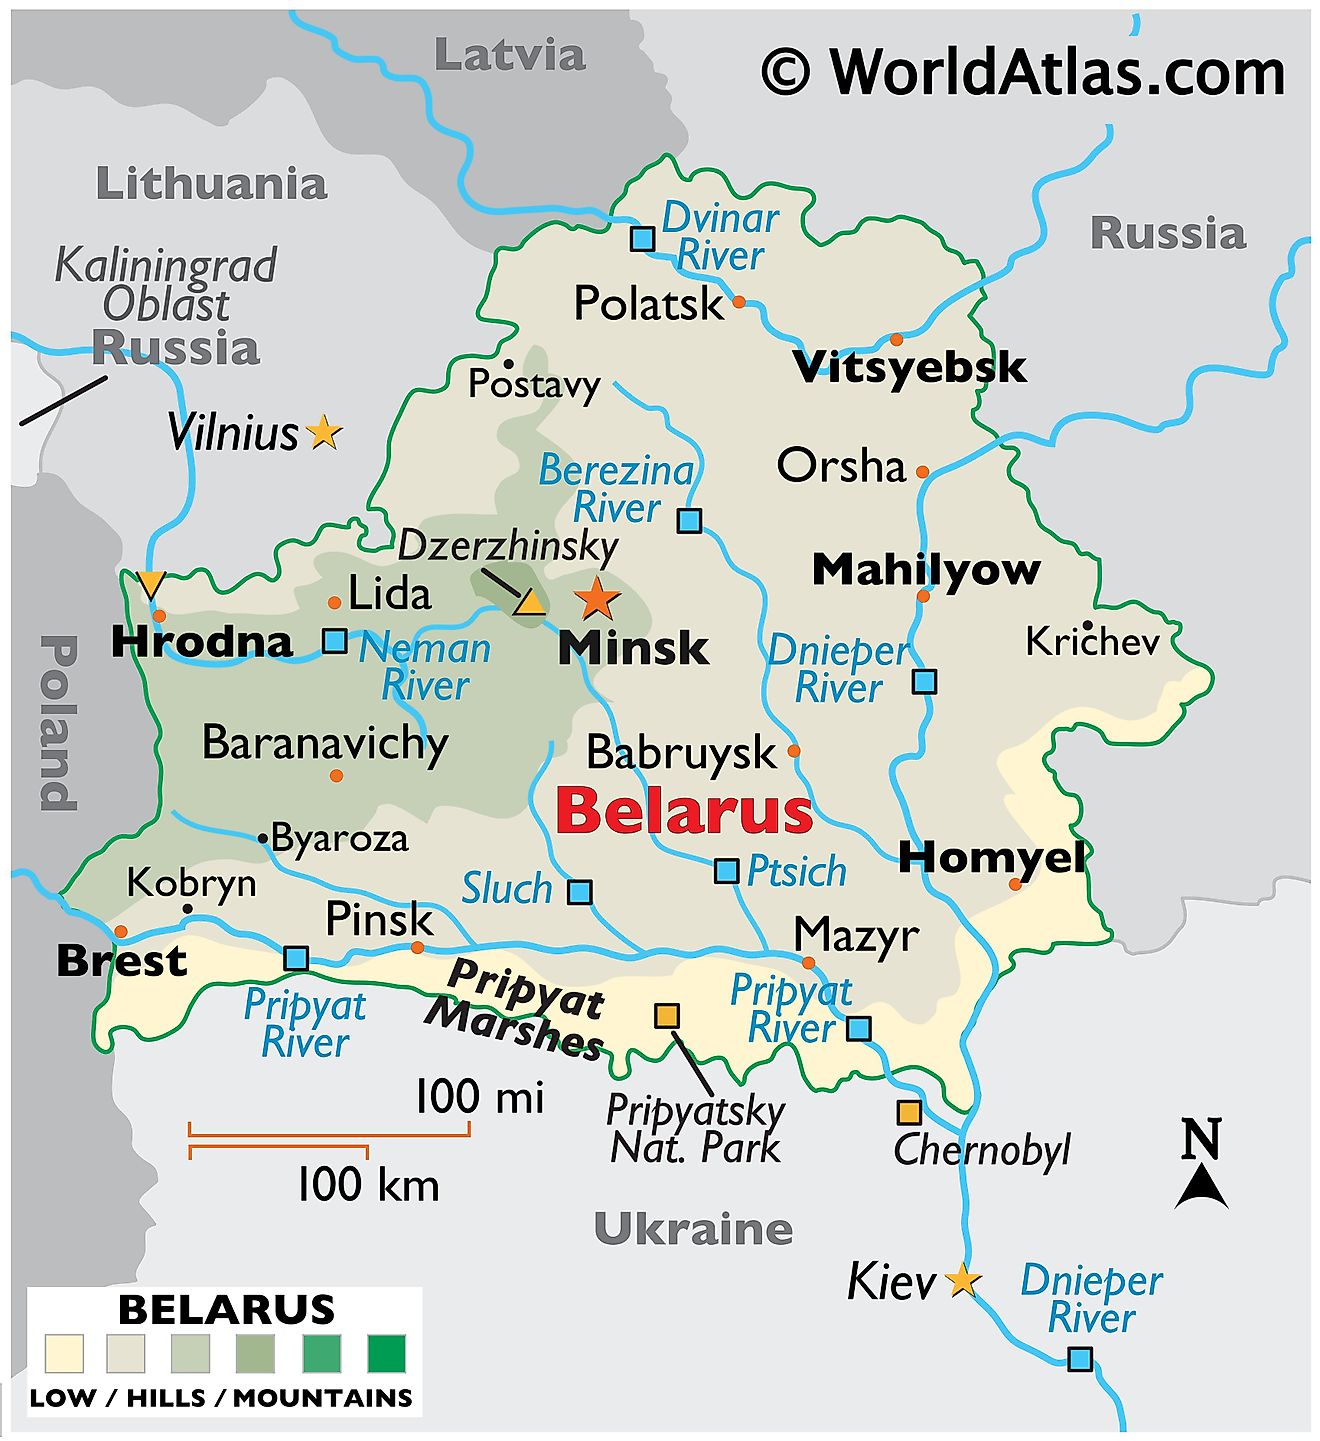 Physical Map of Belarus showing terrain, major rivers, extreme points, important cities, international boundaries, etc.